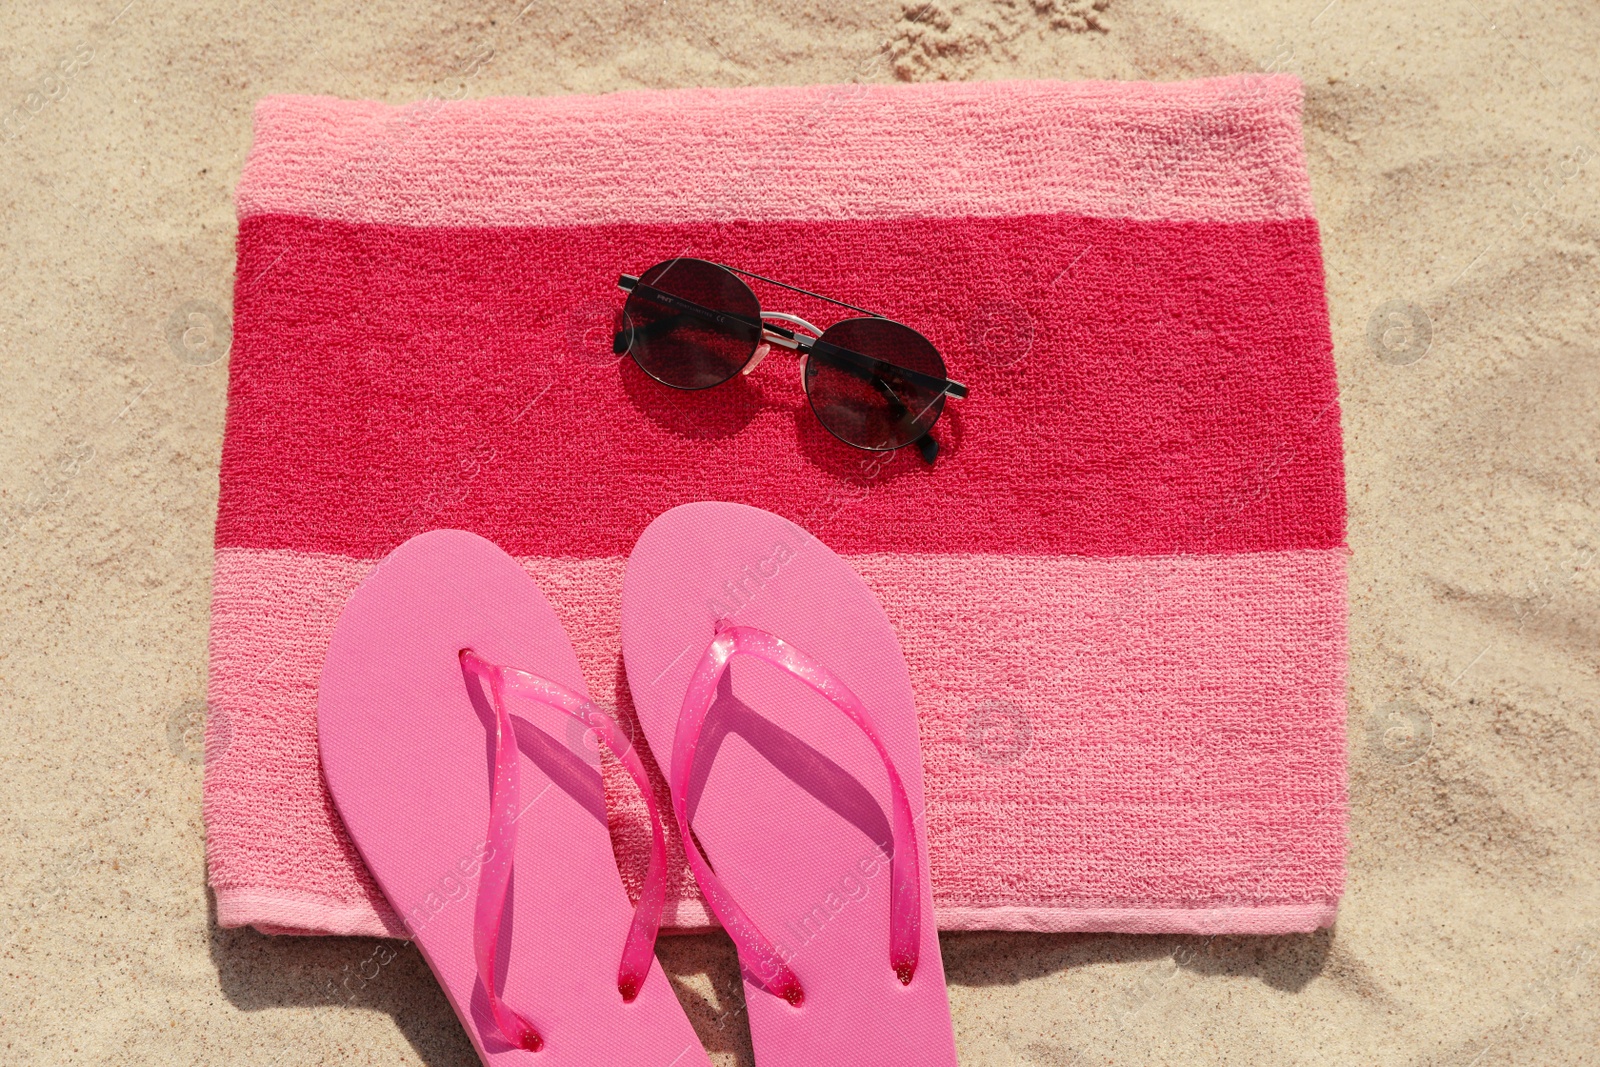 Photo of Beach towel with slippers and sunglasses on sand, flat lay